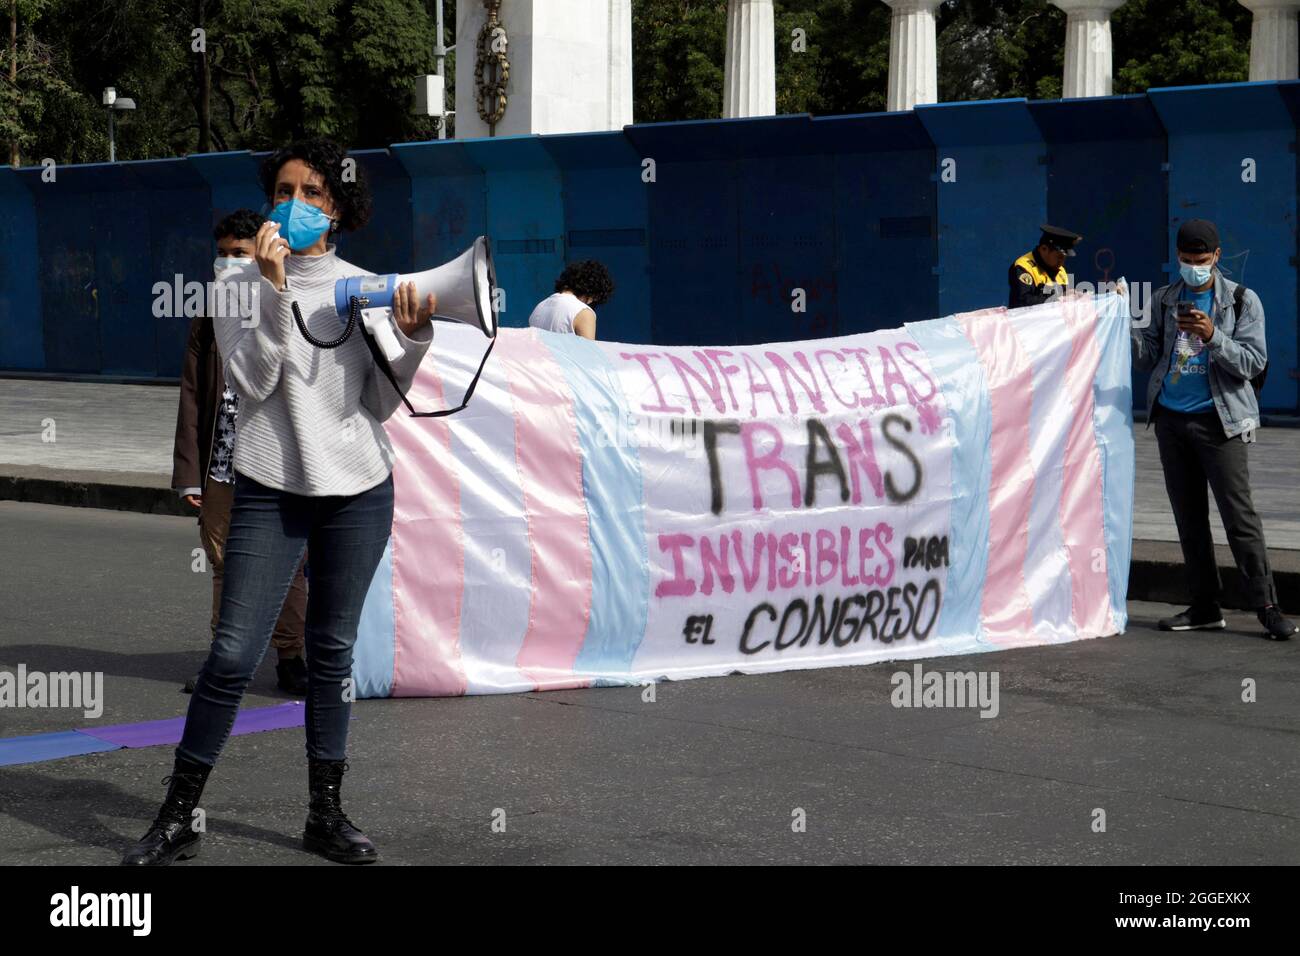 Integrants of human rights of LGTTTIQ+ community take part during a demonstration outside of the courts of Mexico City, to demand for a Transgender Children's law to be approved, with such law infants will have a birth certificate with their gender. On August 30, 2021 in Mexico City, Mexico. Photo by Luis Barron / Eyepix /ABACAPRESS.COM Stock Photo